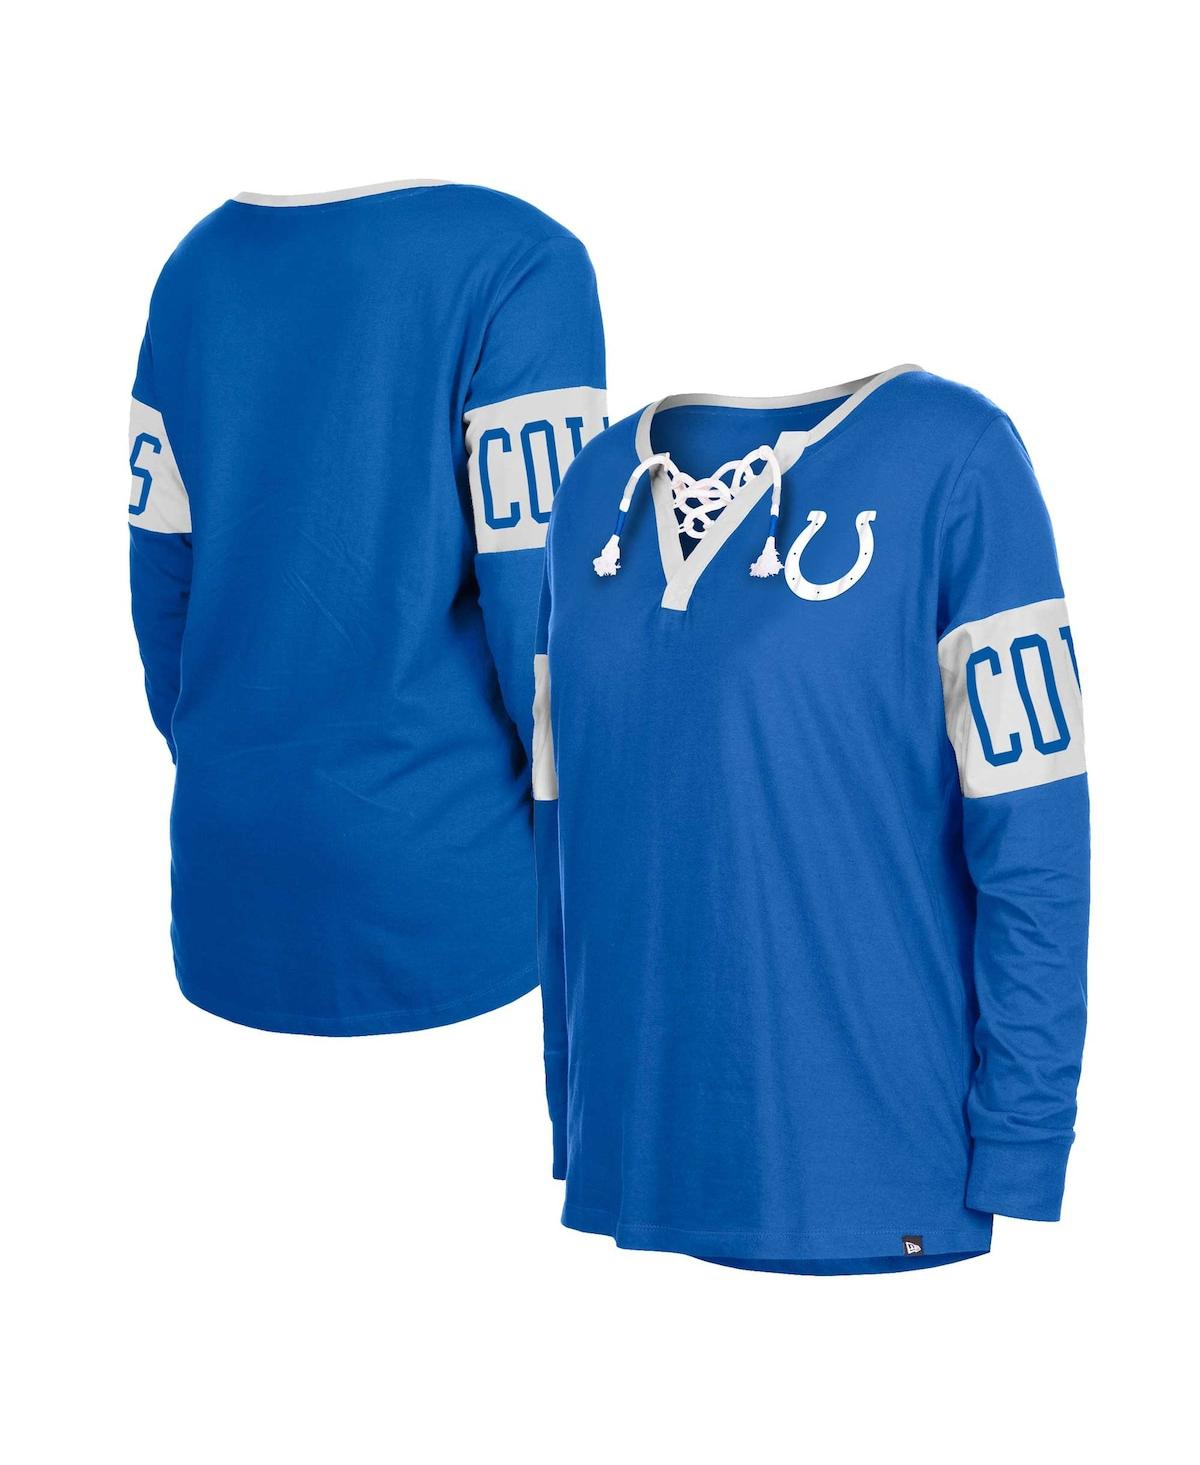 New Era Women's  Blue Indianapolis Colts Lace-up Notch Neck Long Sleeve T-shirt